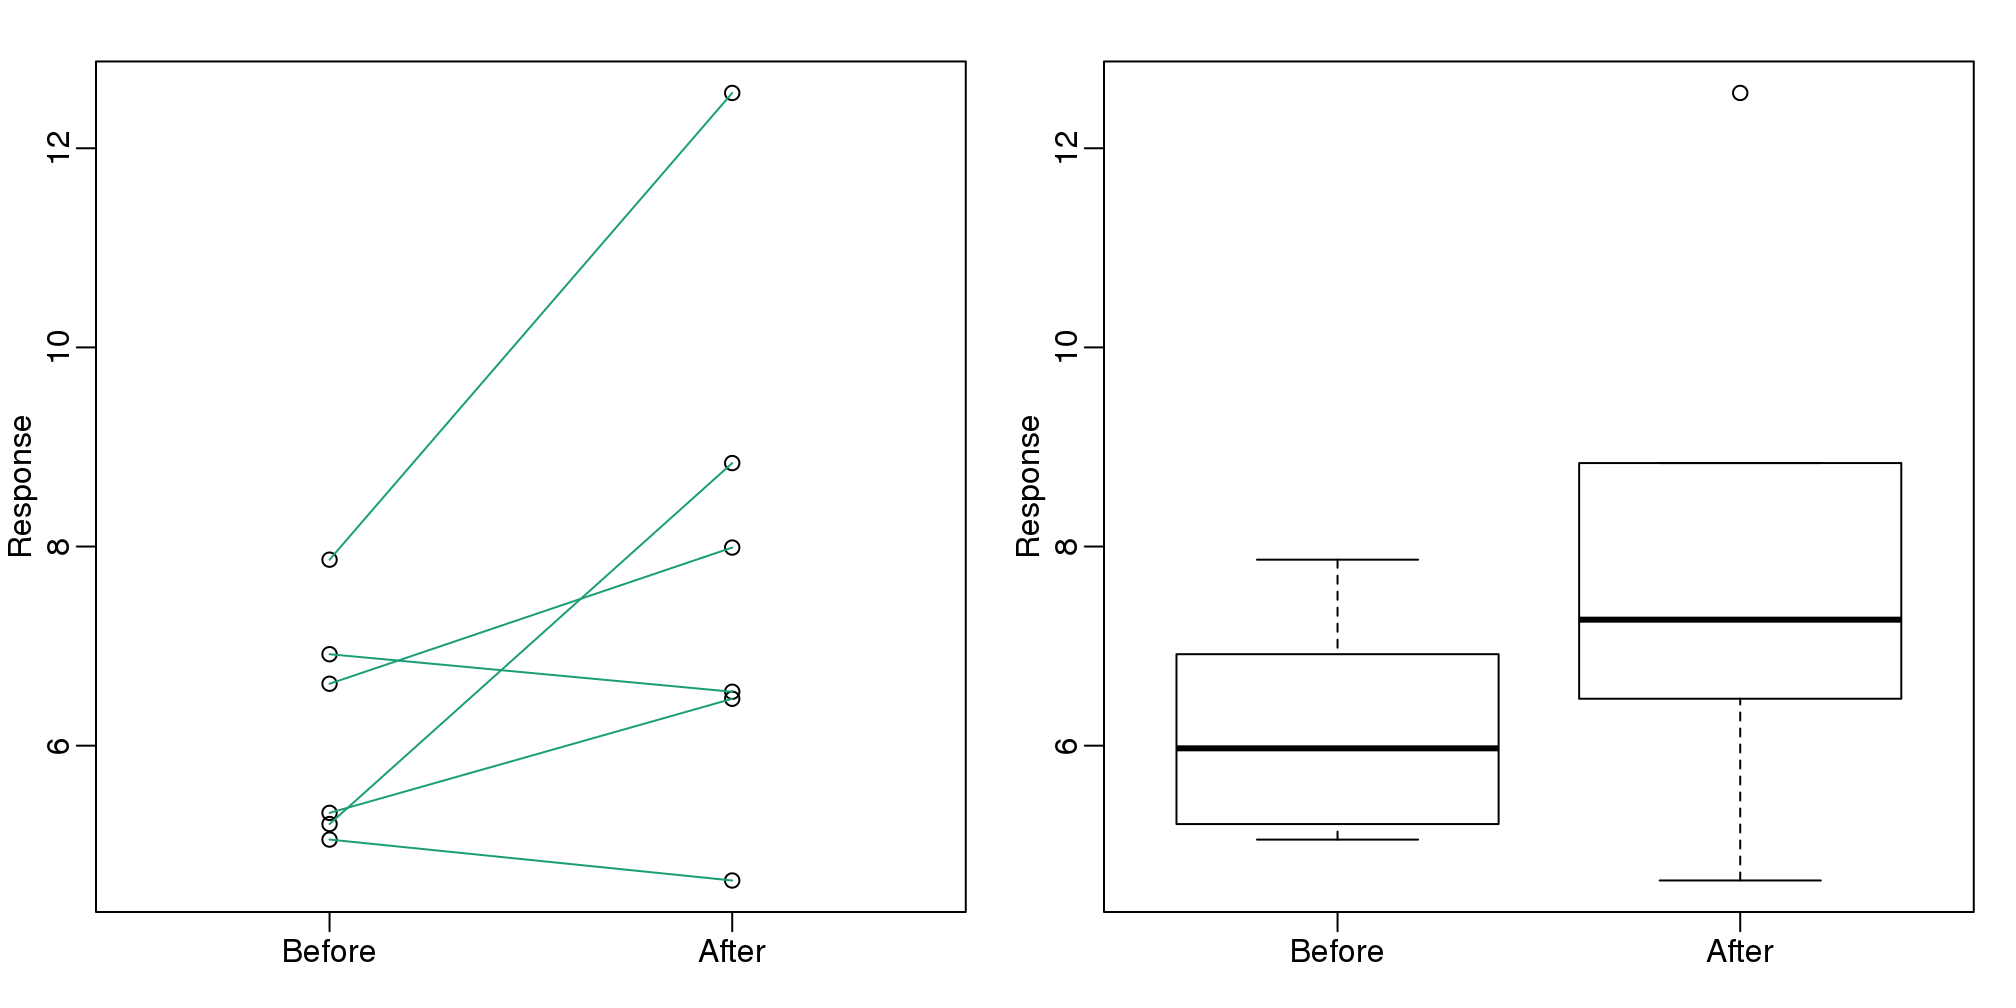 Another alternative is a line plot. If we don't care about pairings, then the boxplot is appropriate.